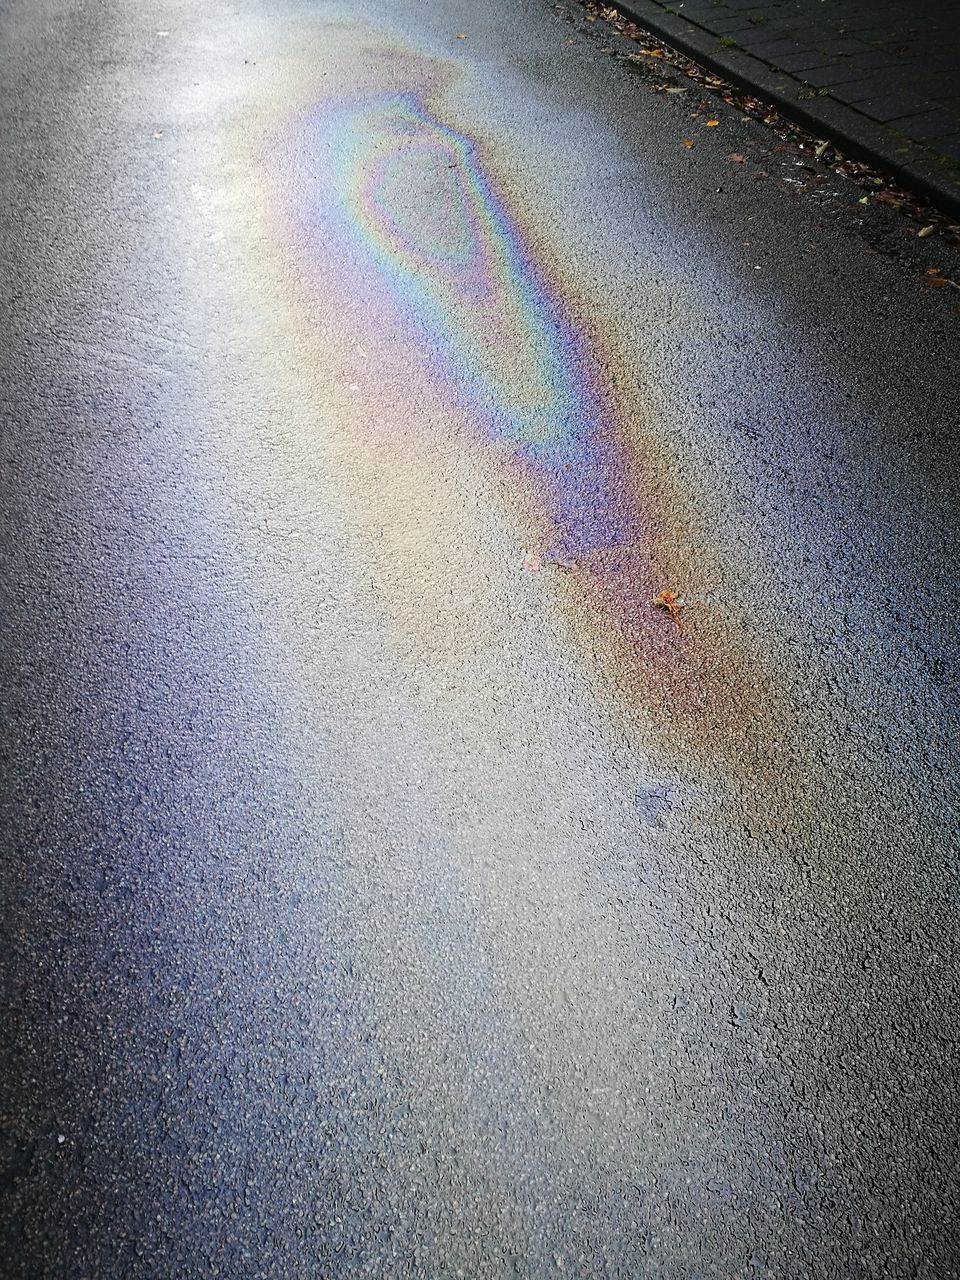 high angle view, oil spill, refueling, leaking, no people, road, asphalt, day, outdoors, close-up